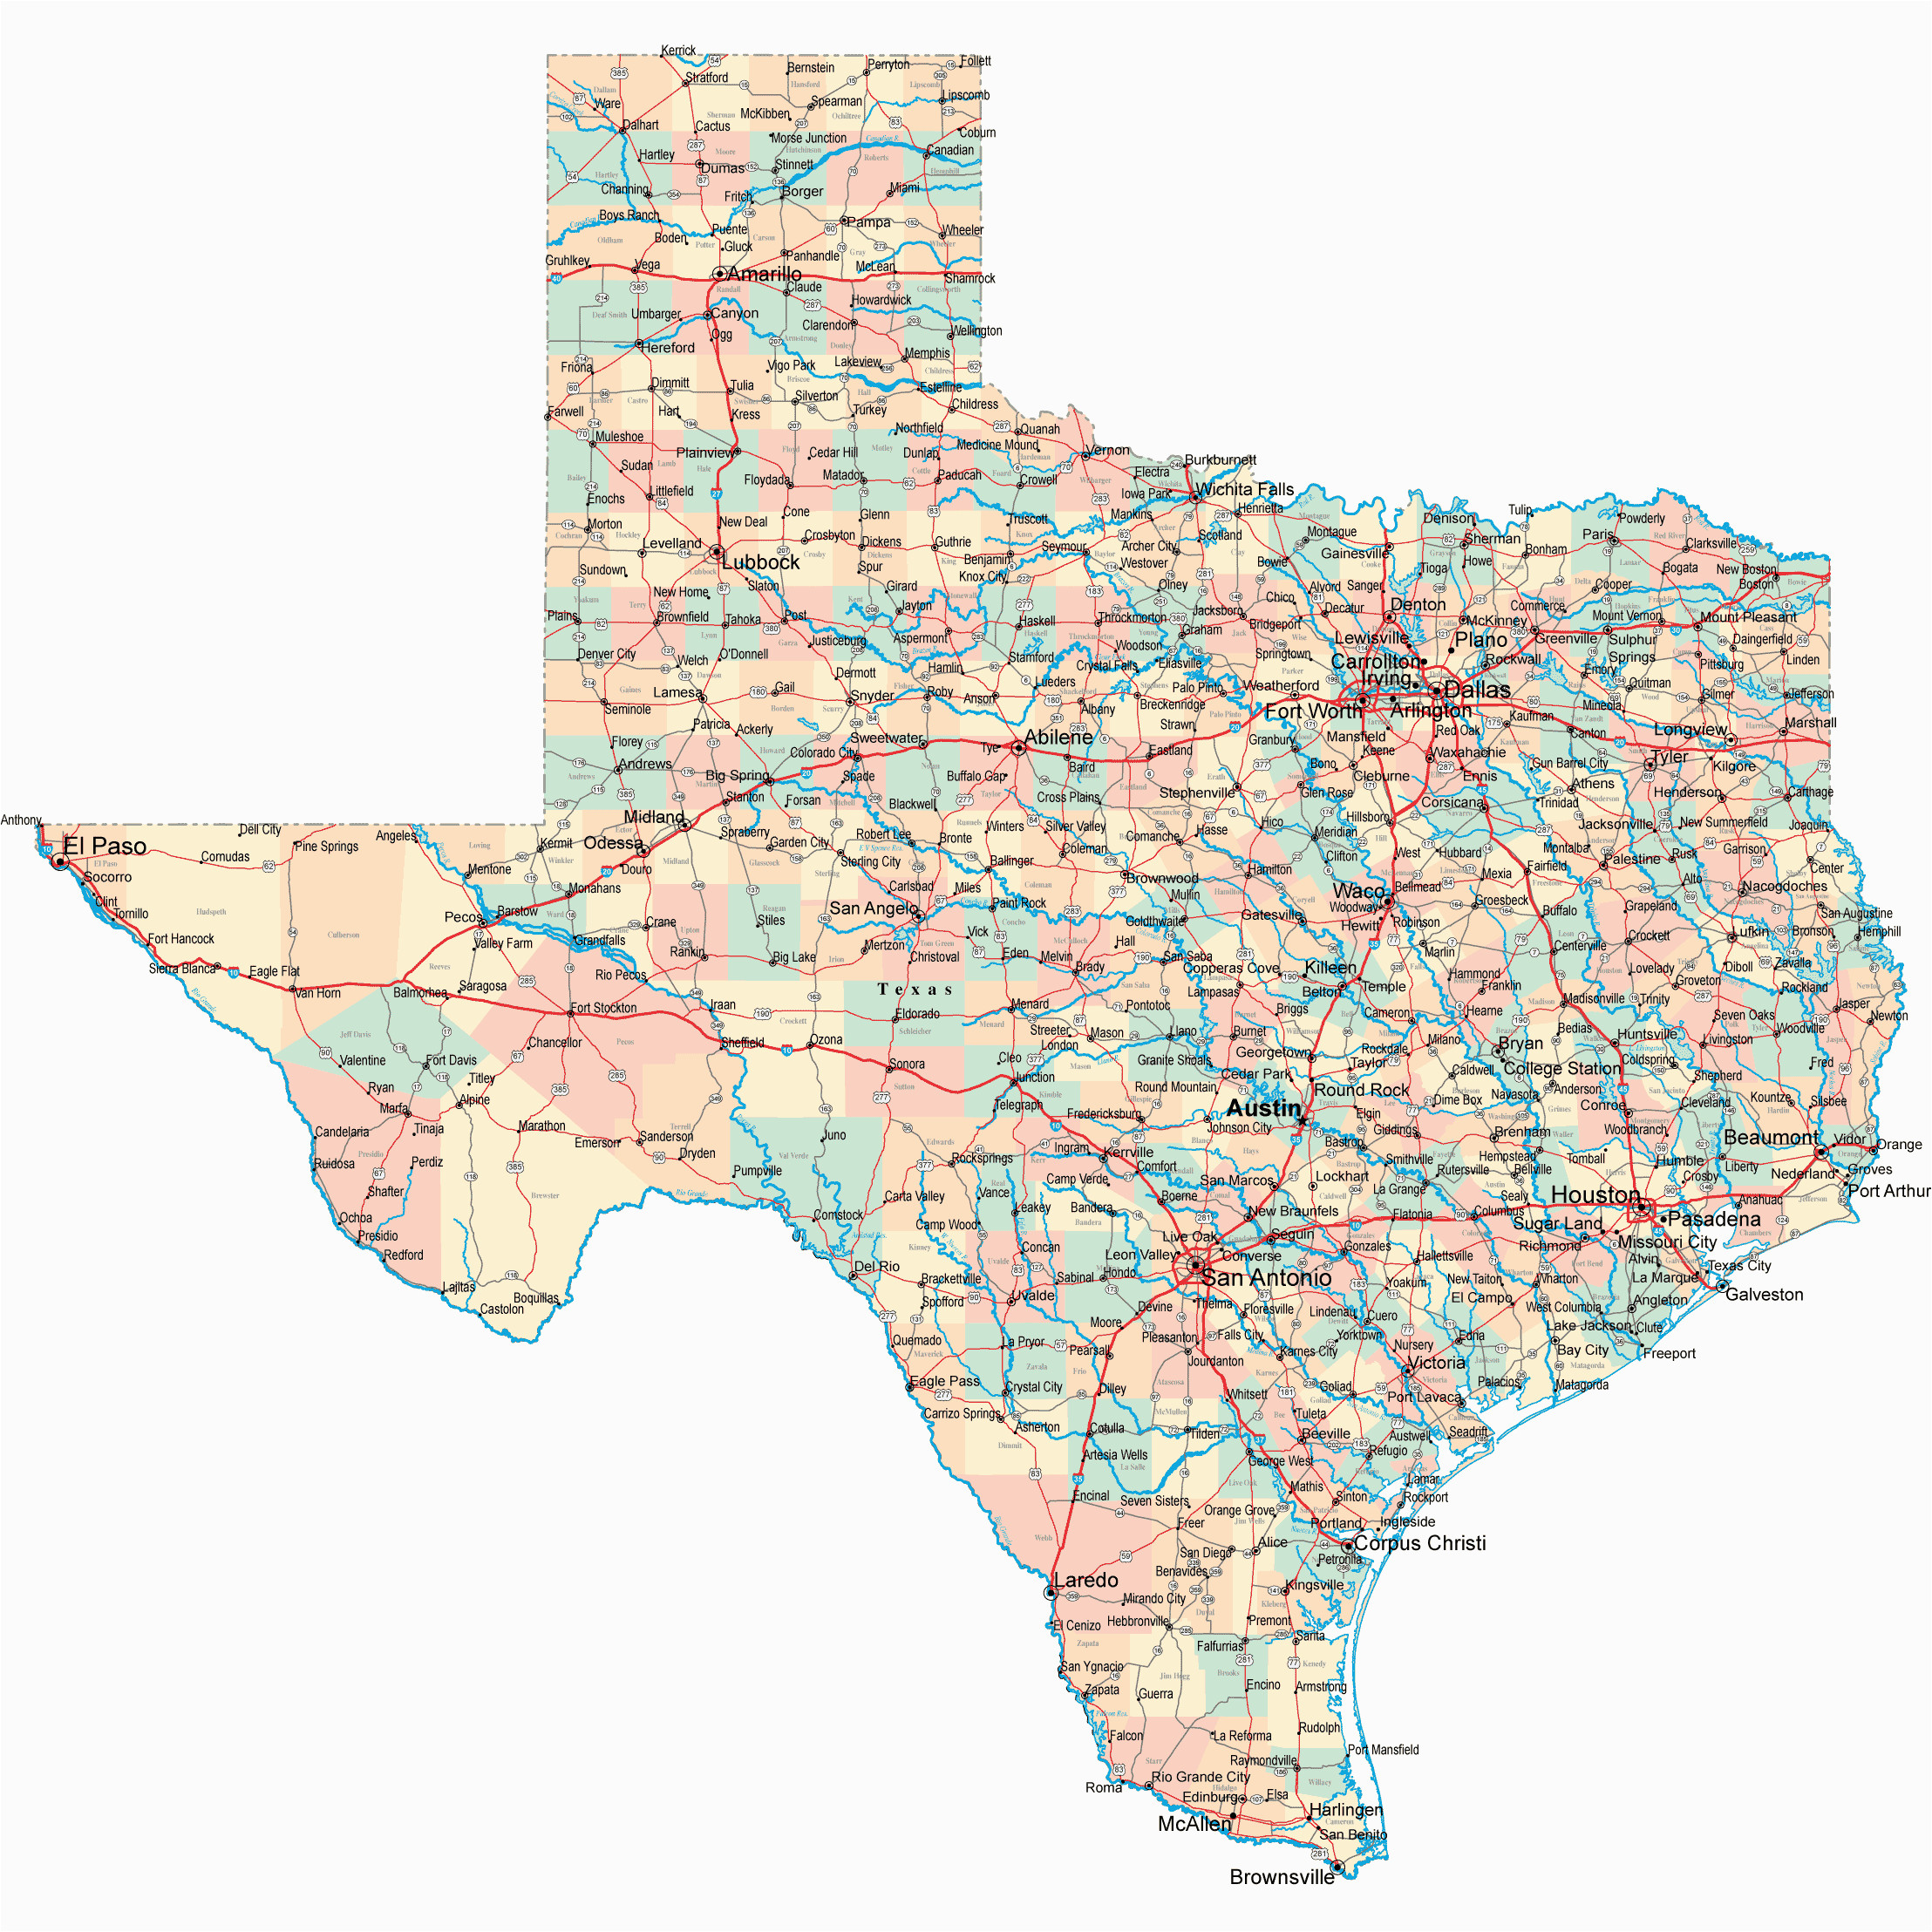 Texas County Map Printable Texas County Map With Highways Business Ideas 2013 Of Texas County Map Printable 